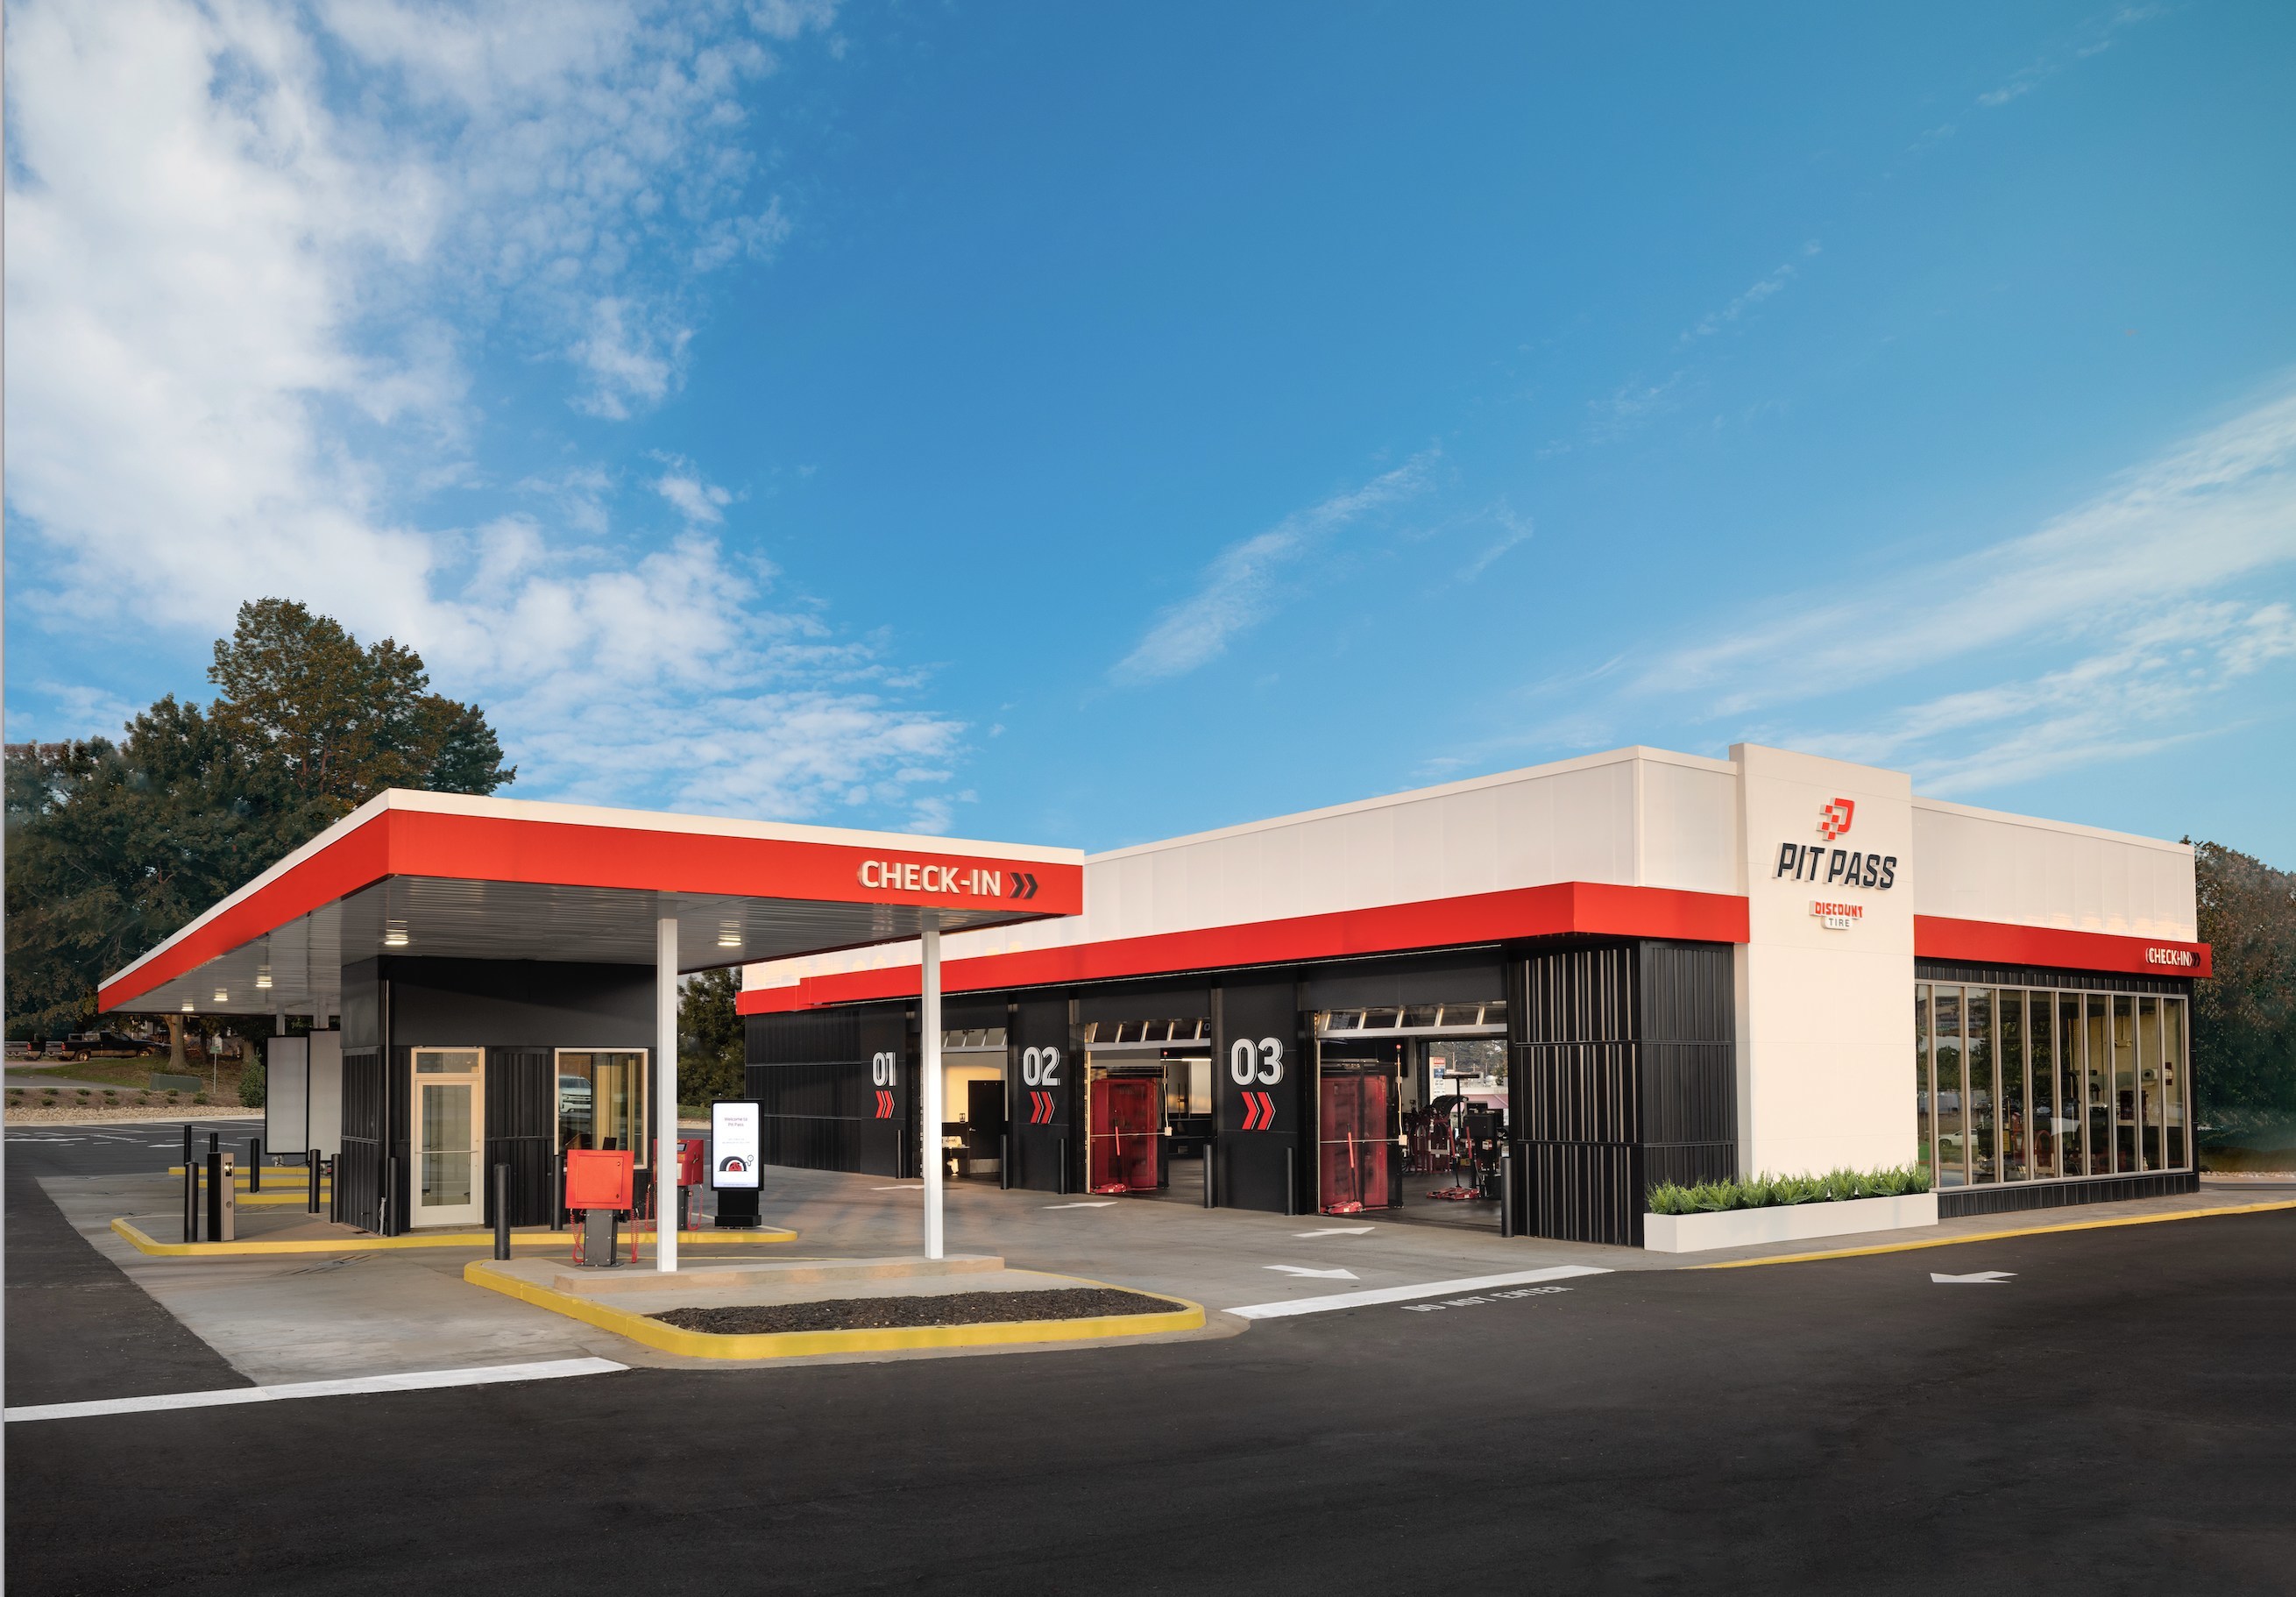 A U.S. tire store chain has unveiled a retail concept that integrates the latest in technologies and customer experience approaches, all under one roof.